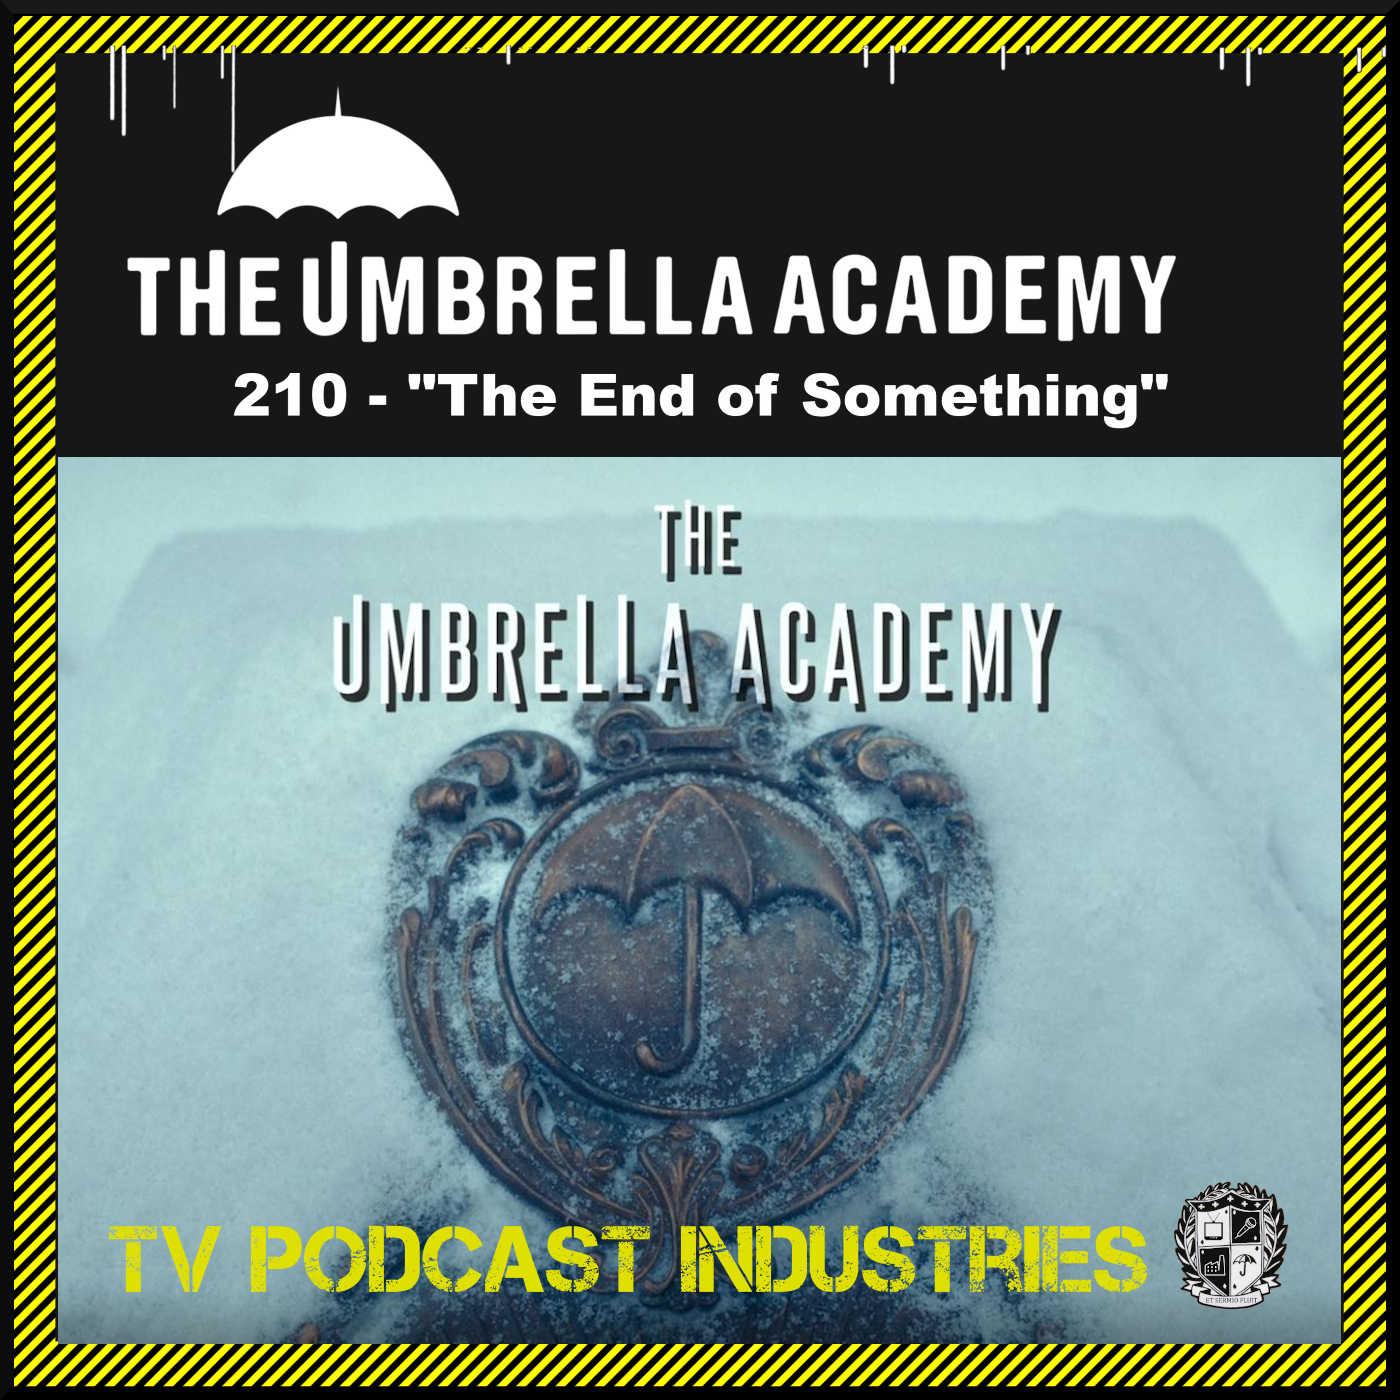 Umbrella Academy 210 Finale Podcast "The End of Something"